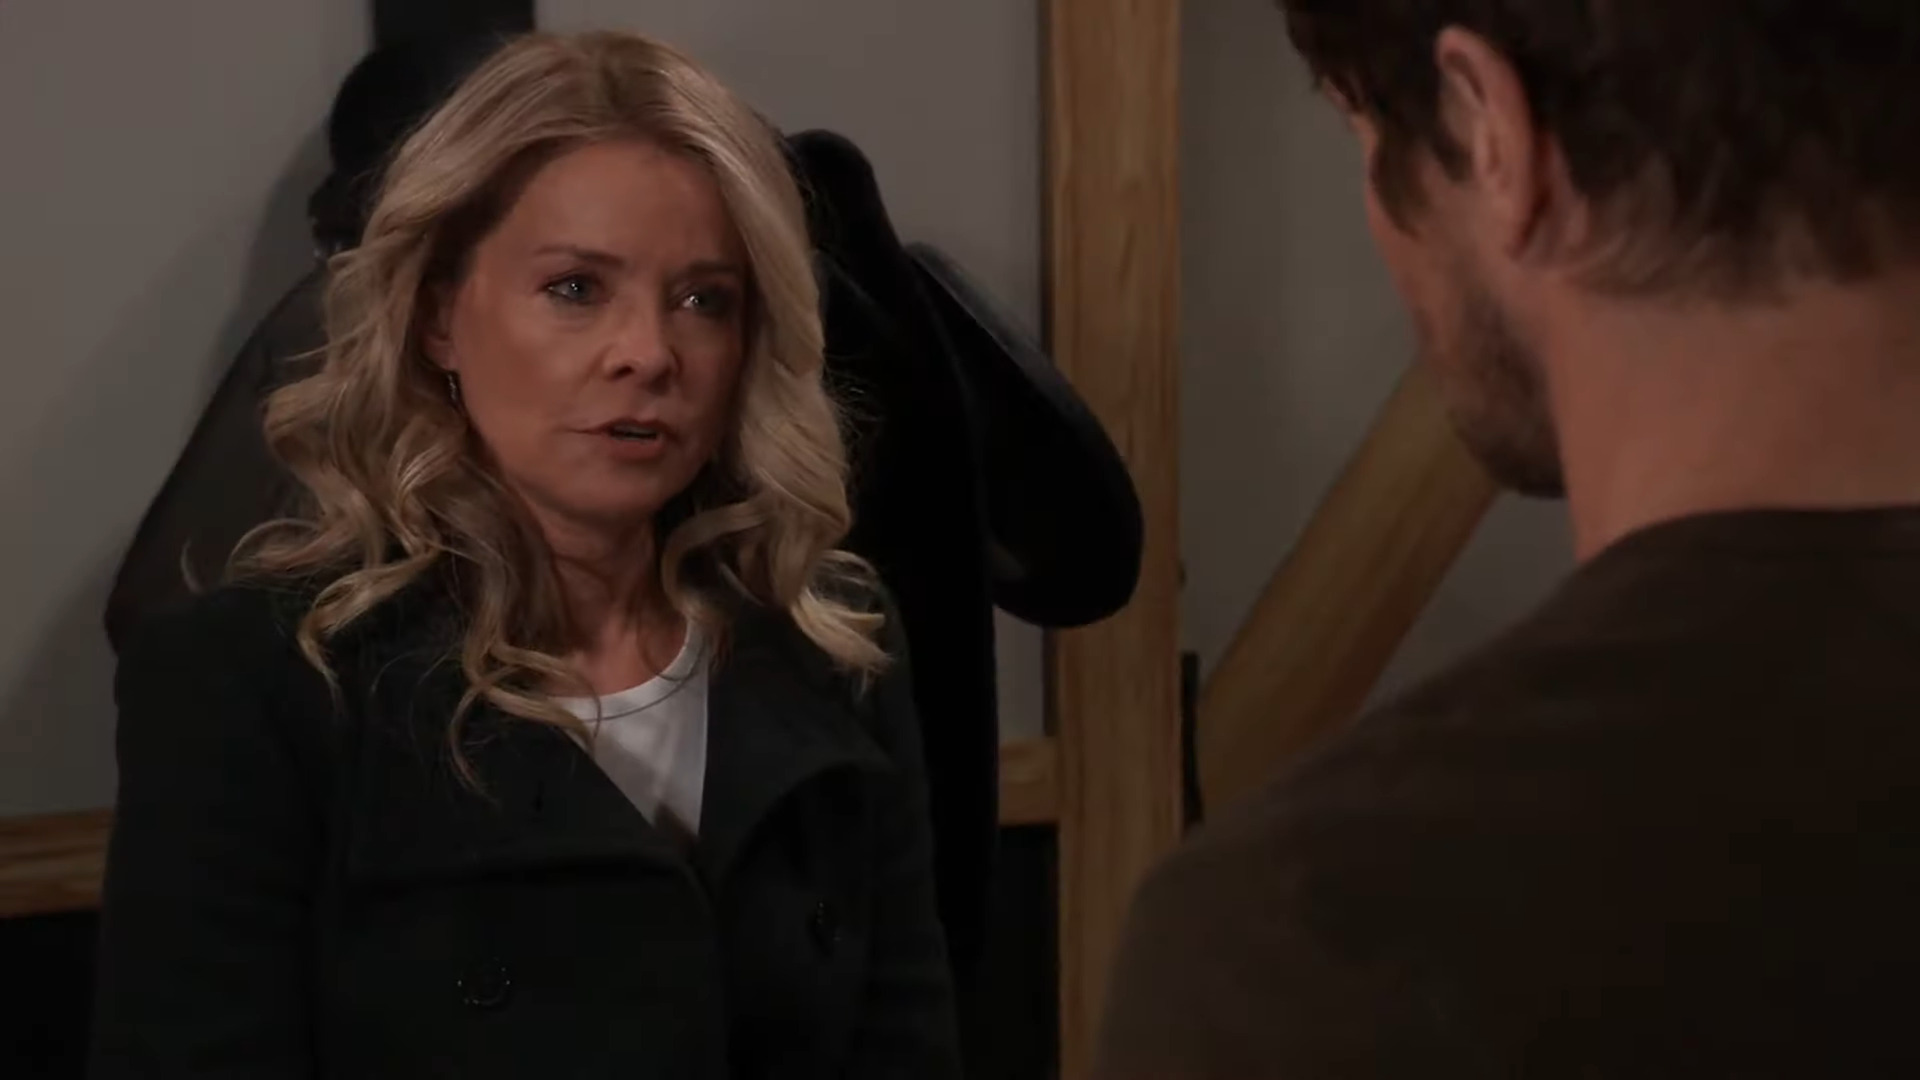 cody felicia never know GH recaps soapsspoilers